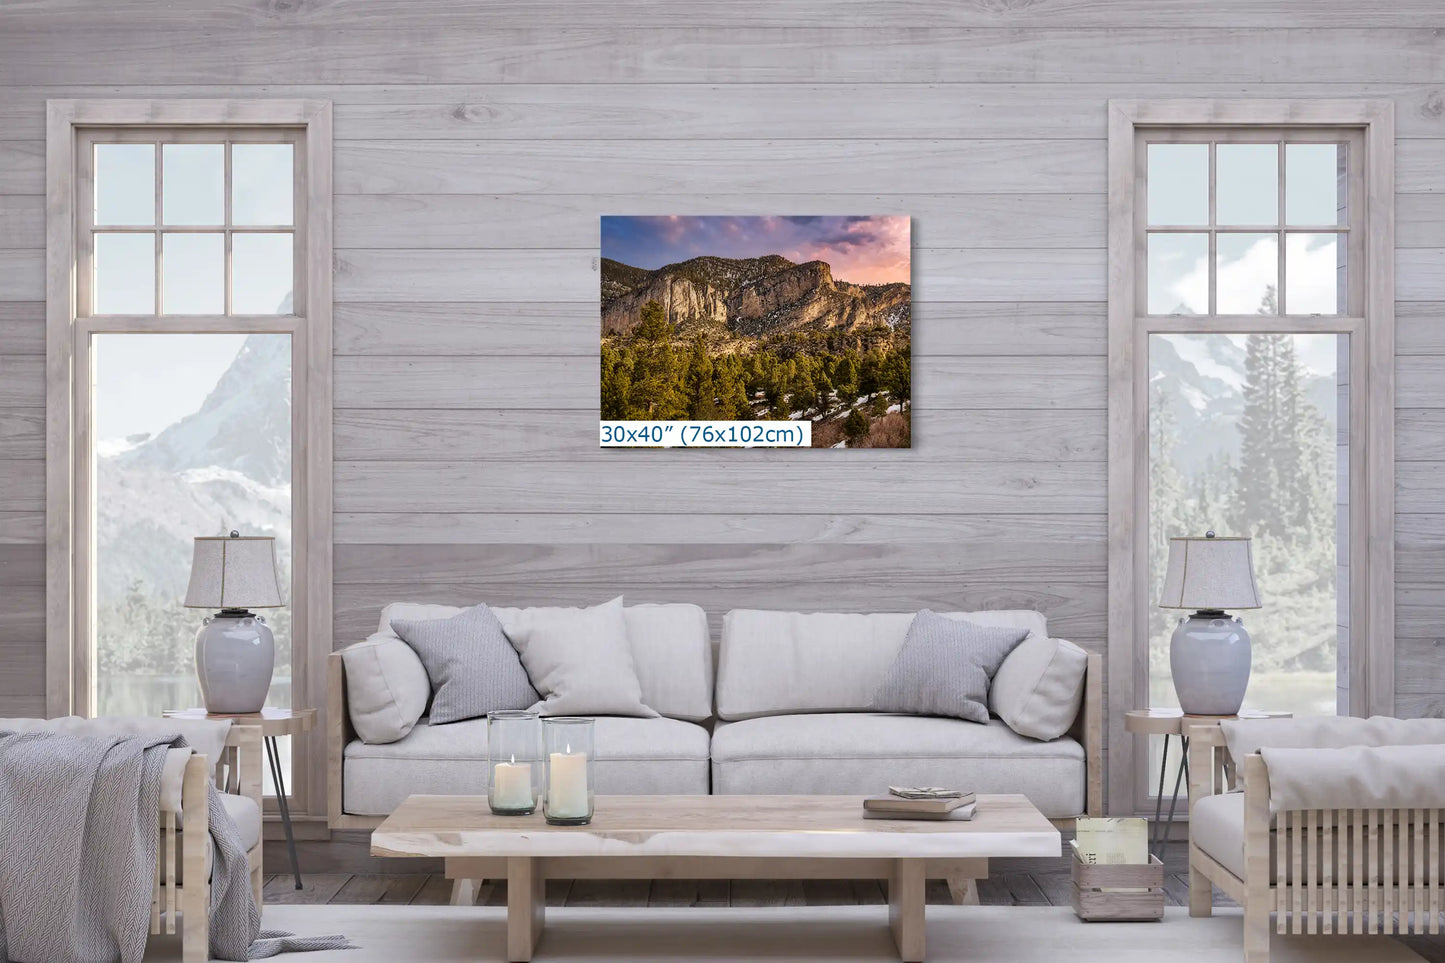 A grand 30x40 canvas capturing the serene majesty of Fletcher Peak at Mt Charleston adorns the living room, infusing the space with a meditative and mesmerizing aura.